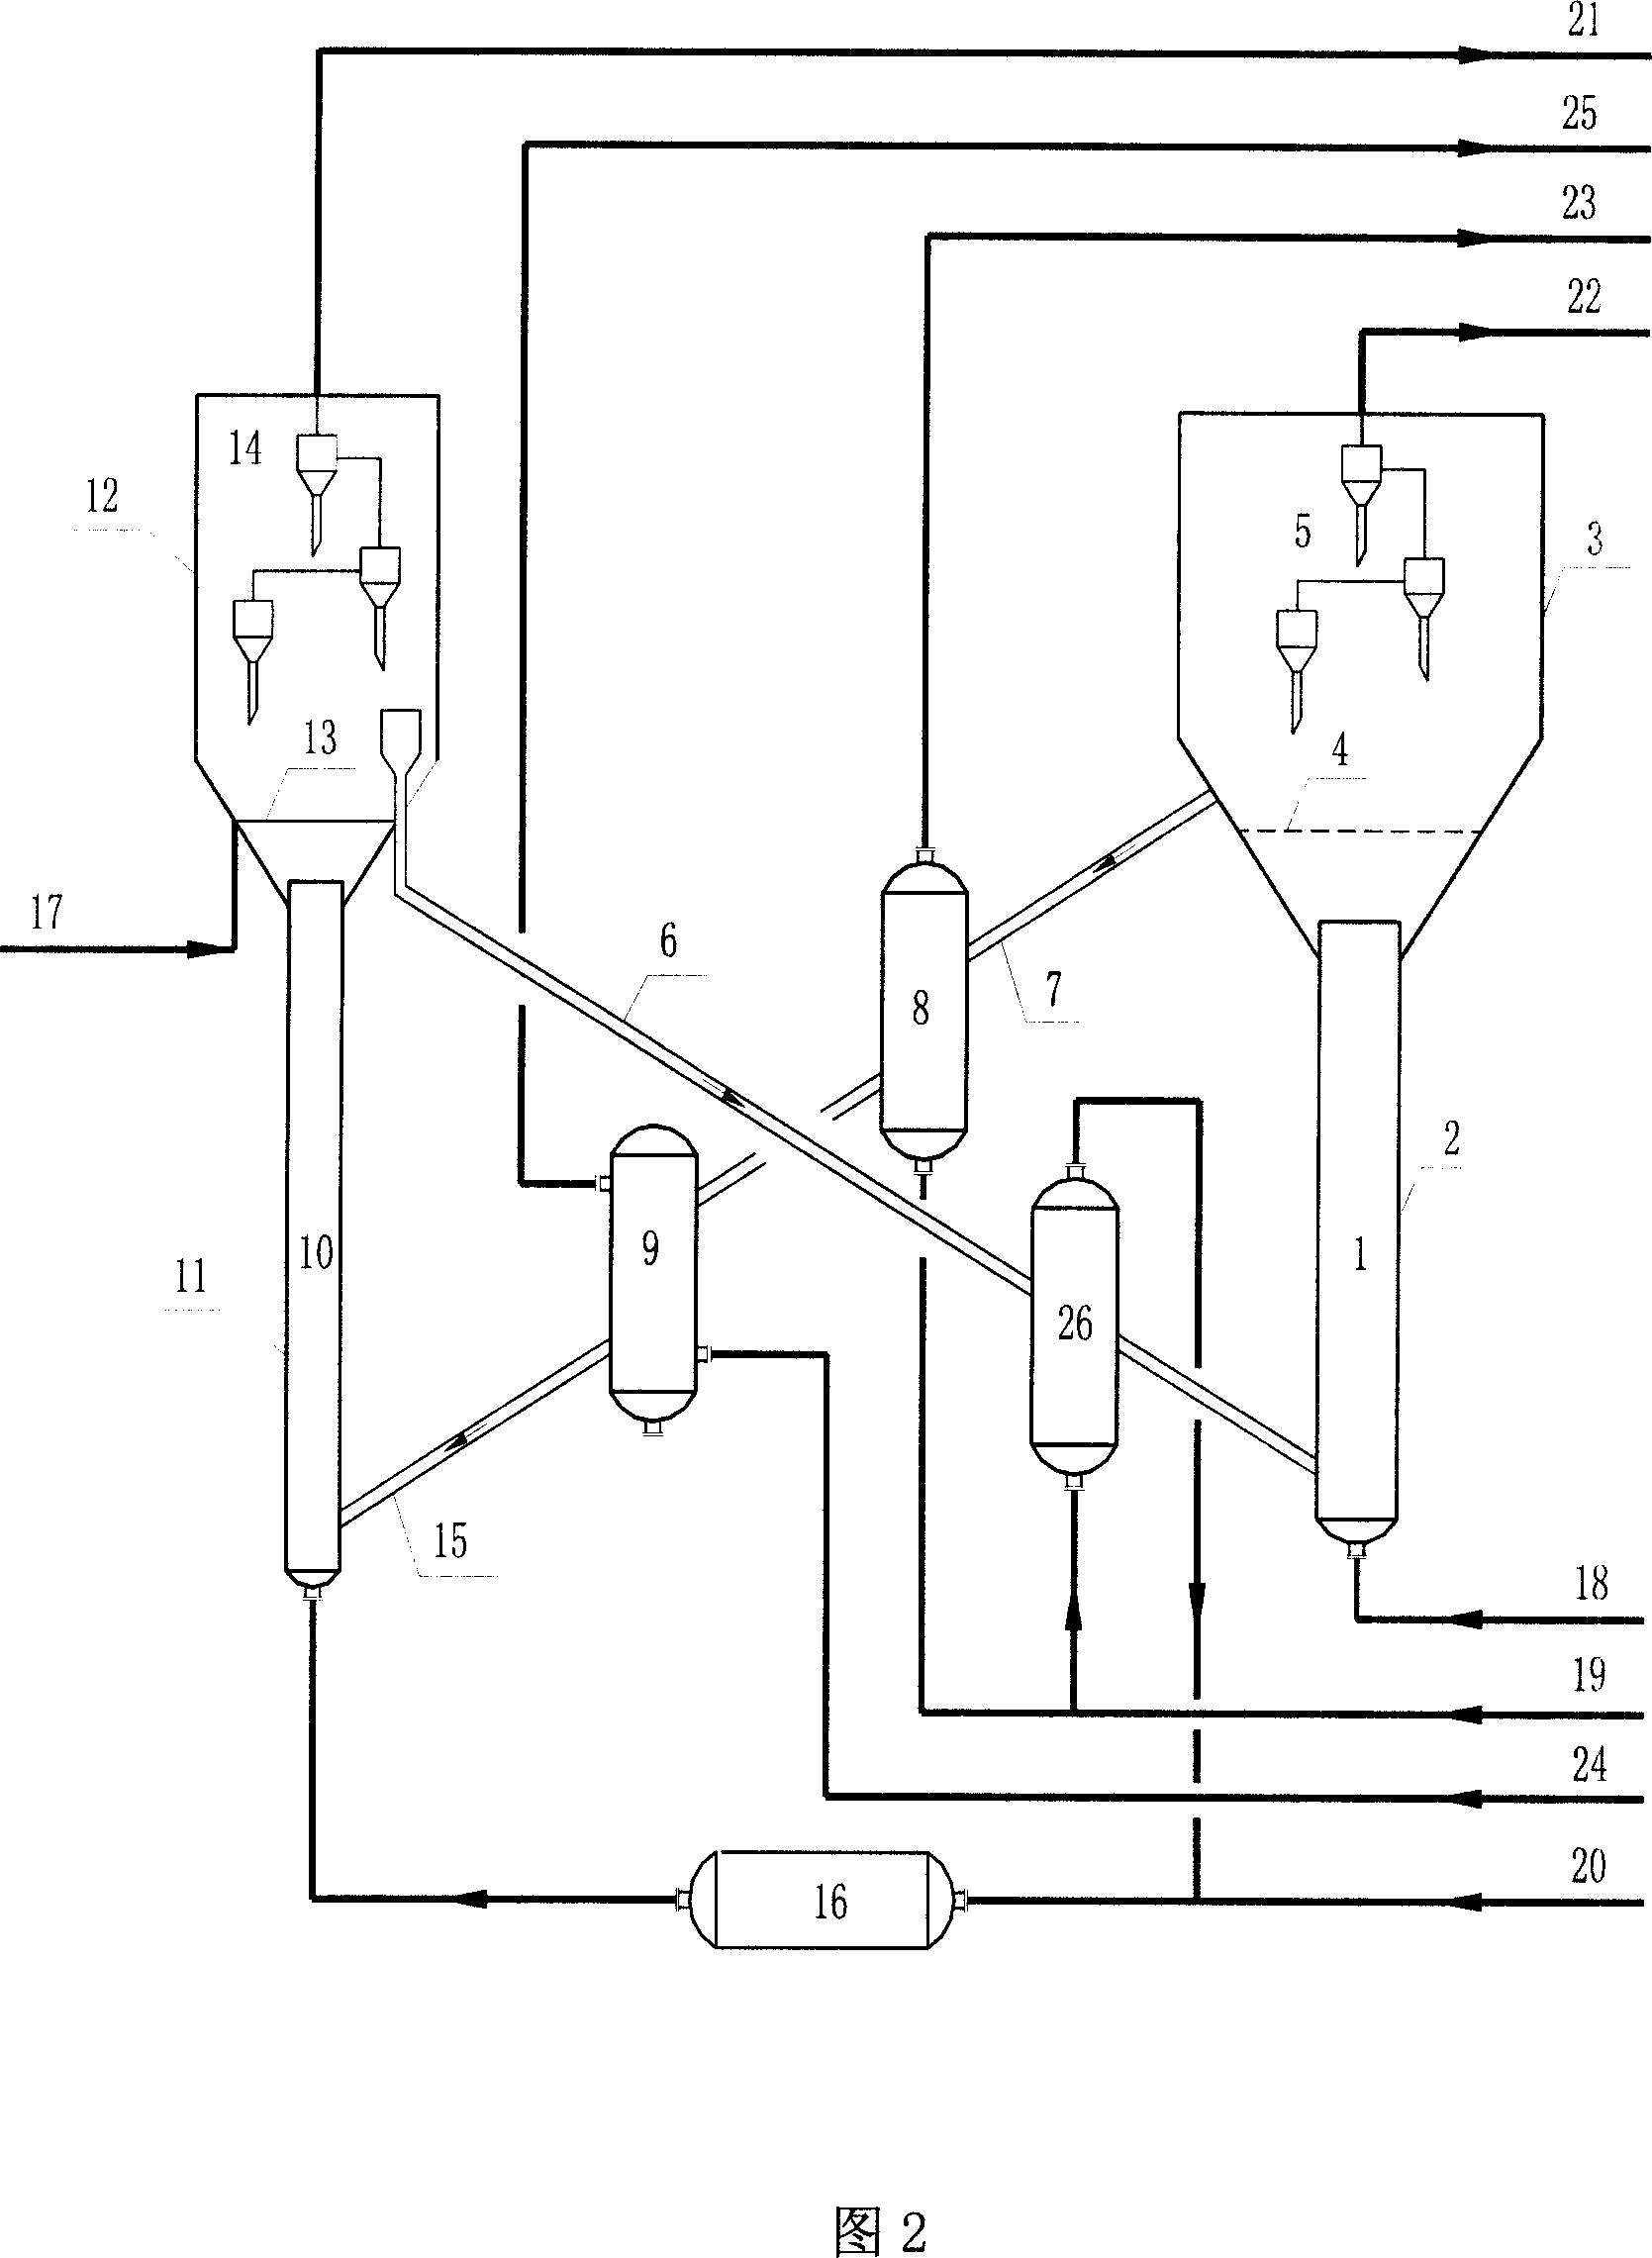 Adsorption forced methane steam reforming hydrogen manufacturing process and apparatus using circulating fluidized bed